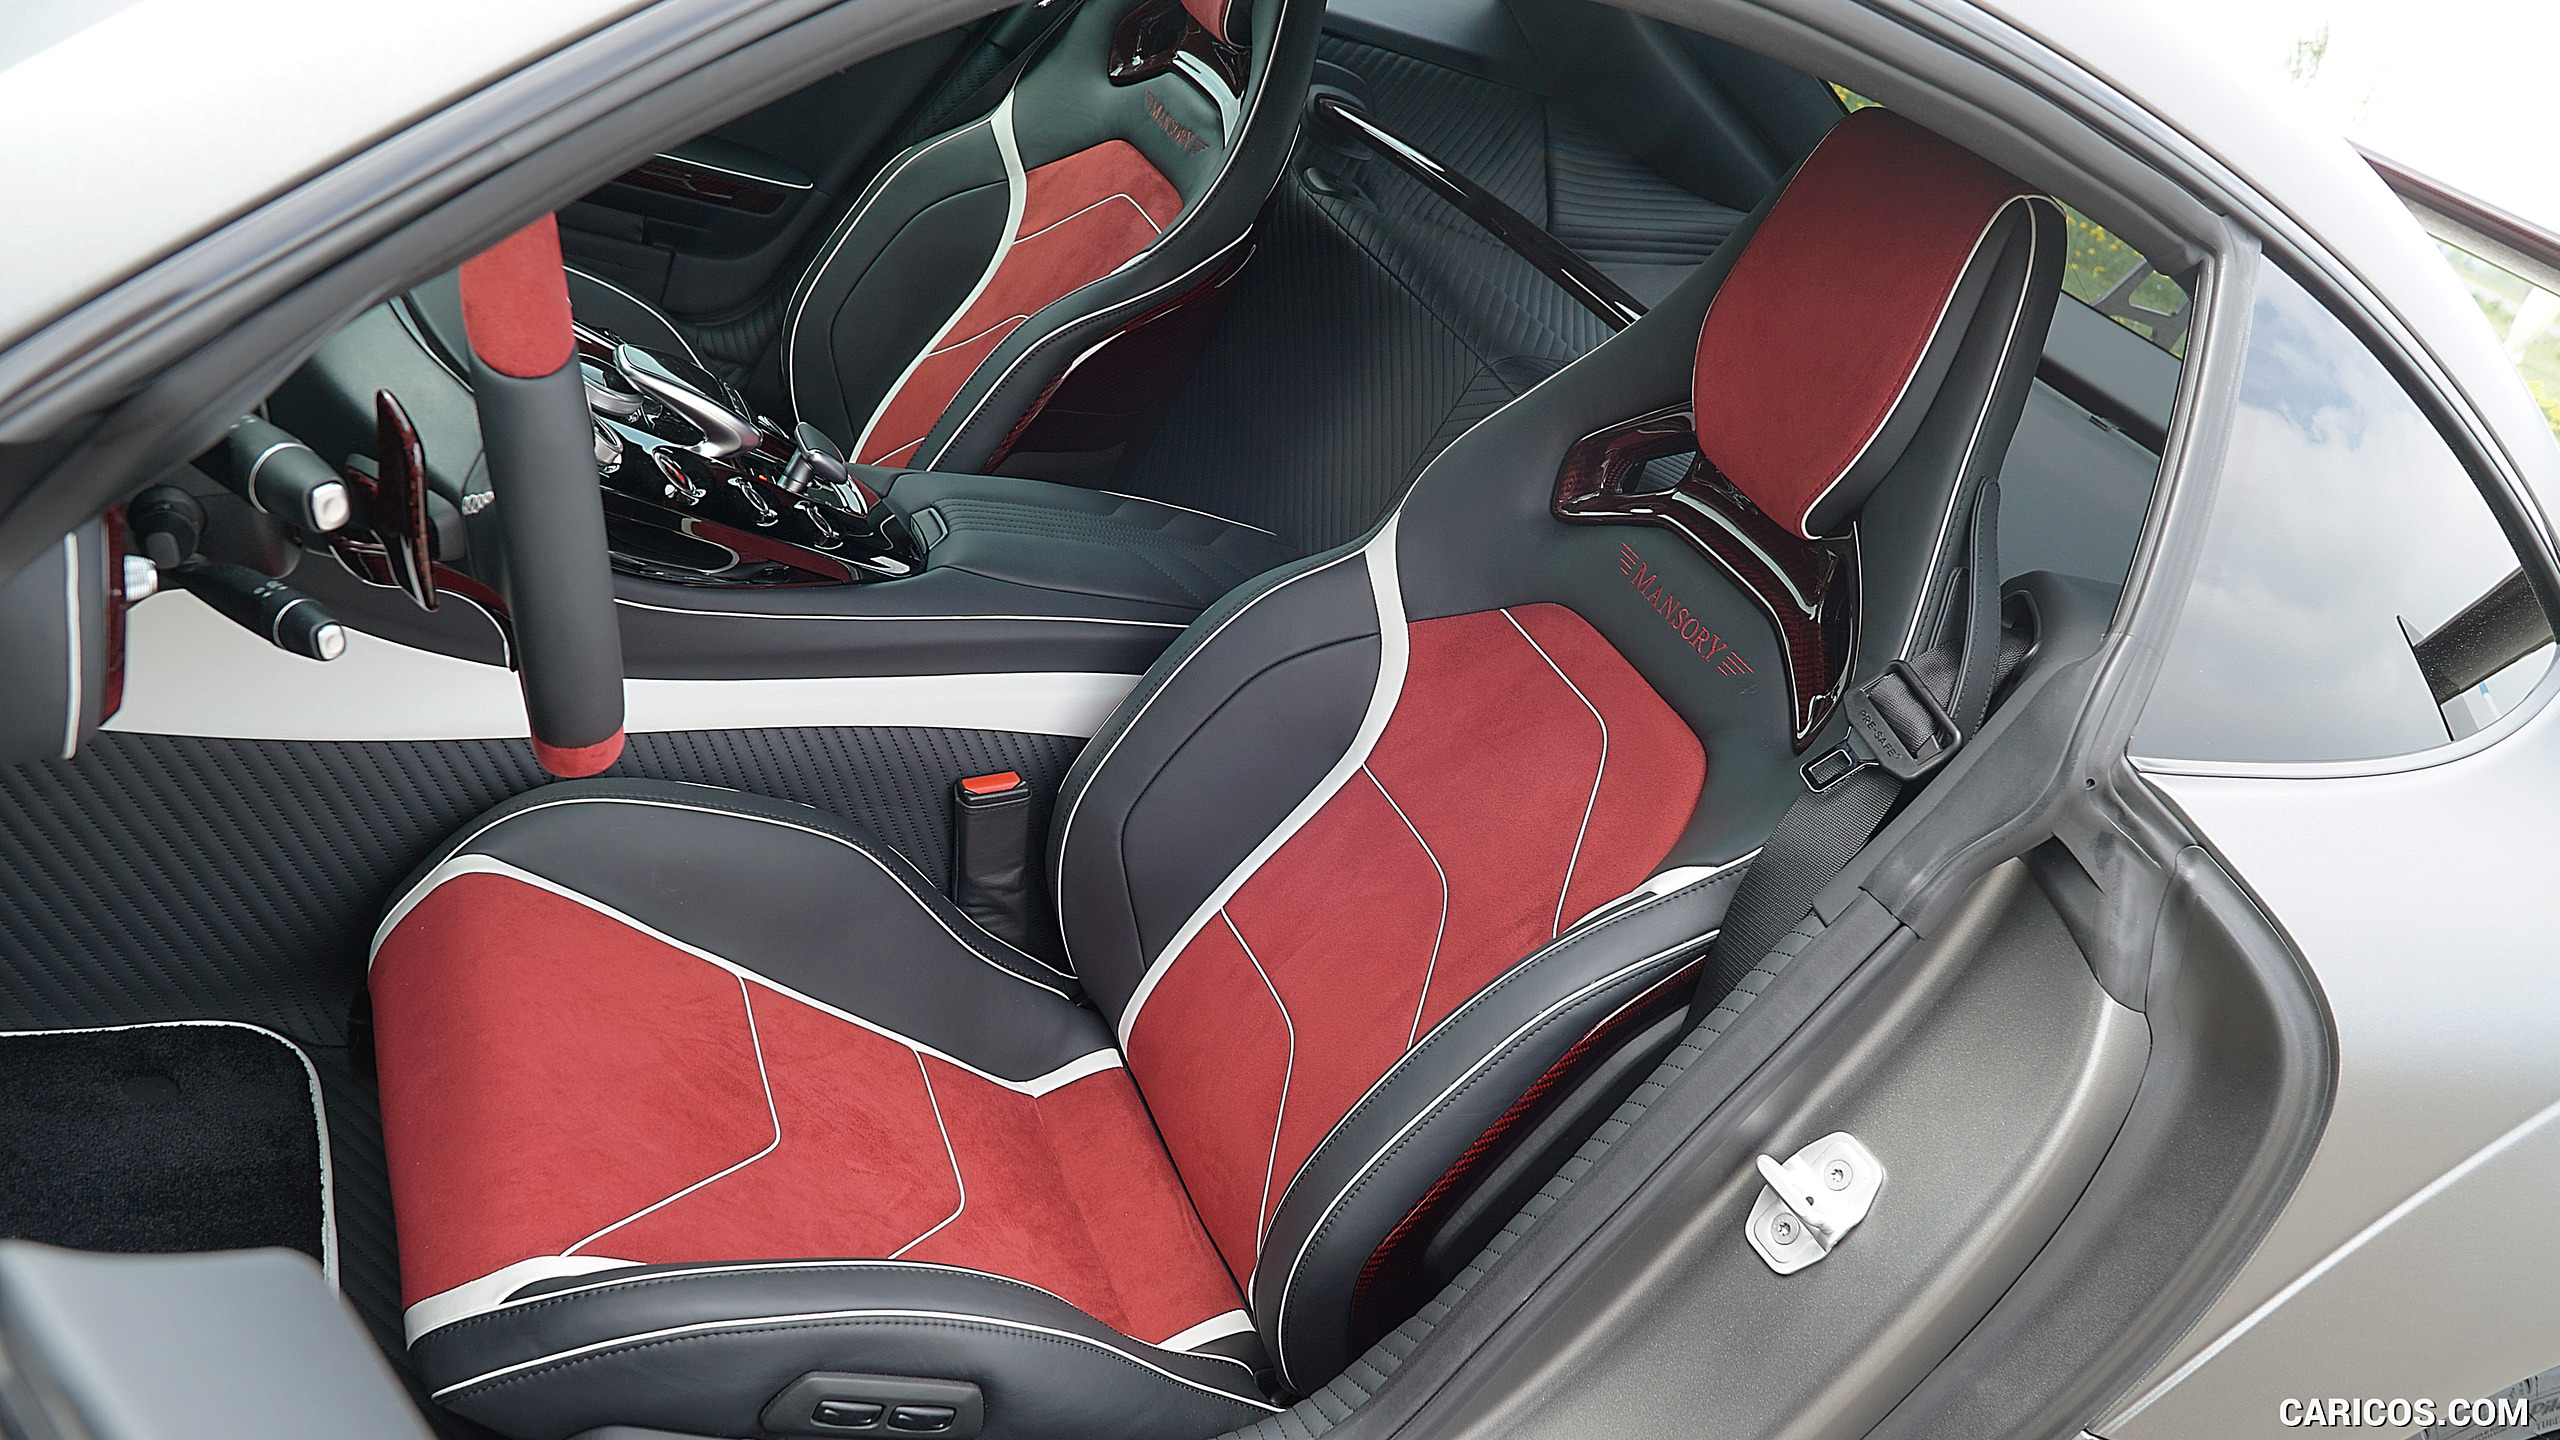 2016 MANSORY Mercedes-AMG GT S [One-Off] - Interior, #6 of 7